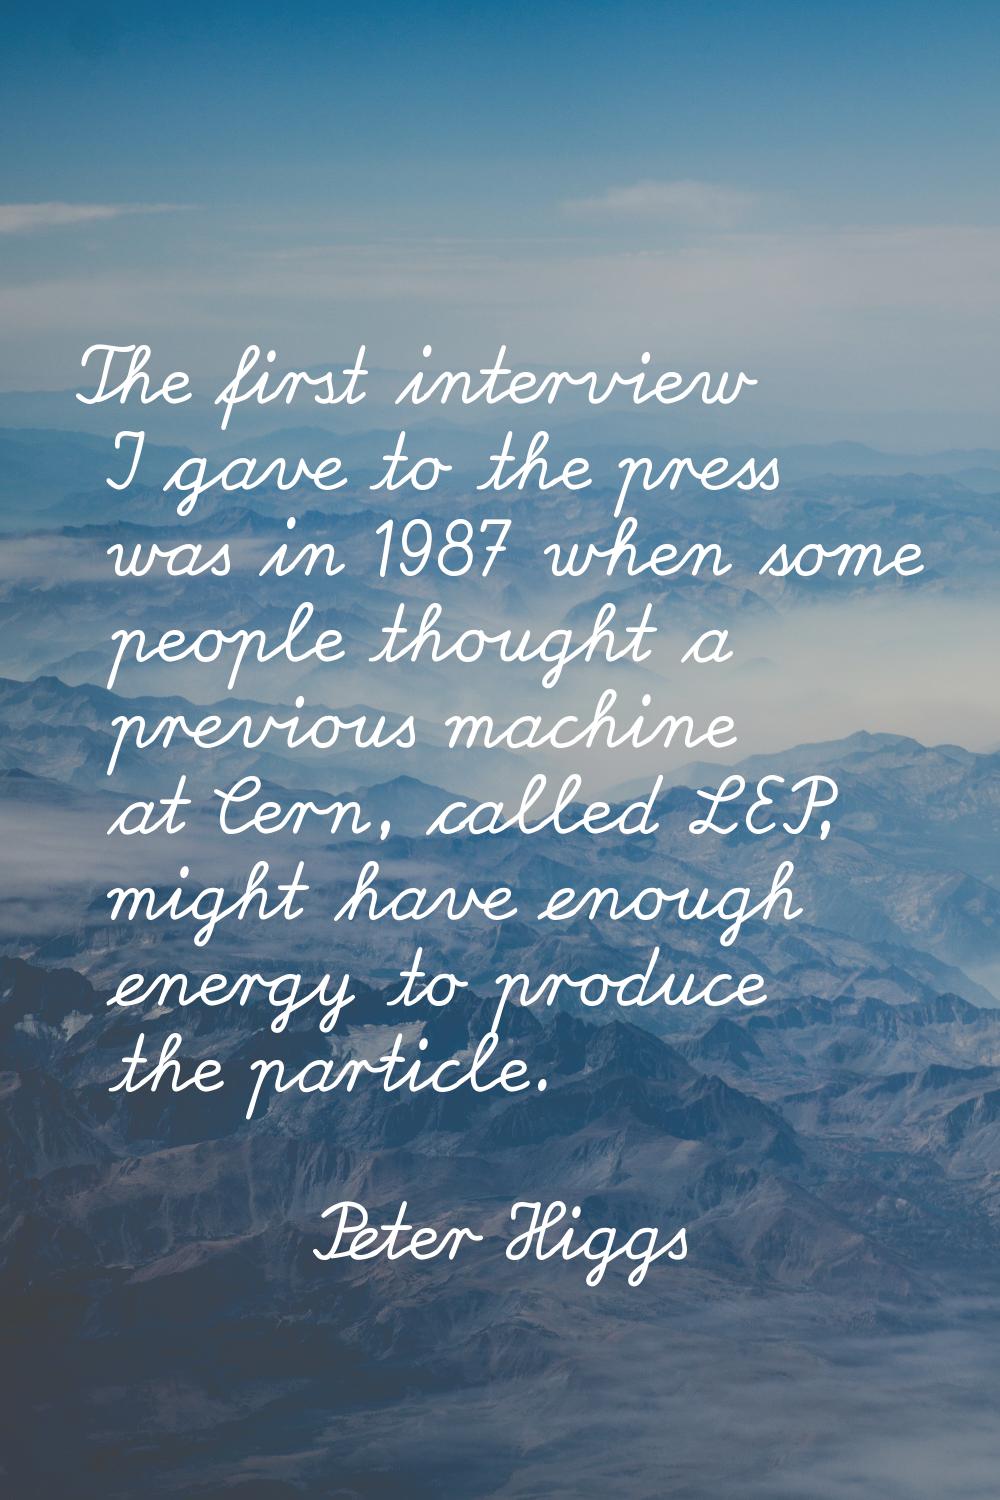 The first interview I gave to the press was in 1987 when some people thought a previous machine at 